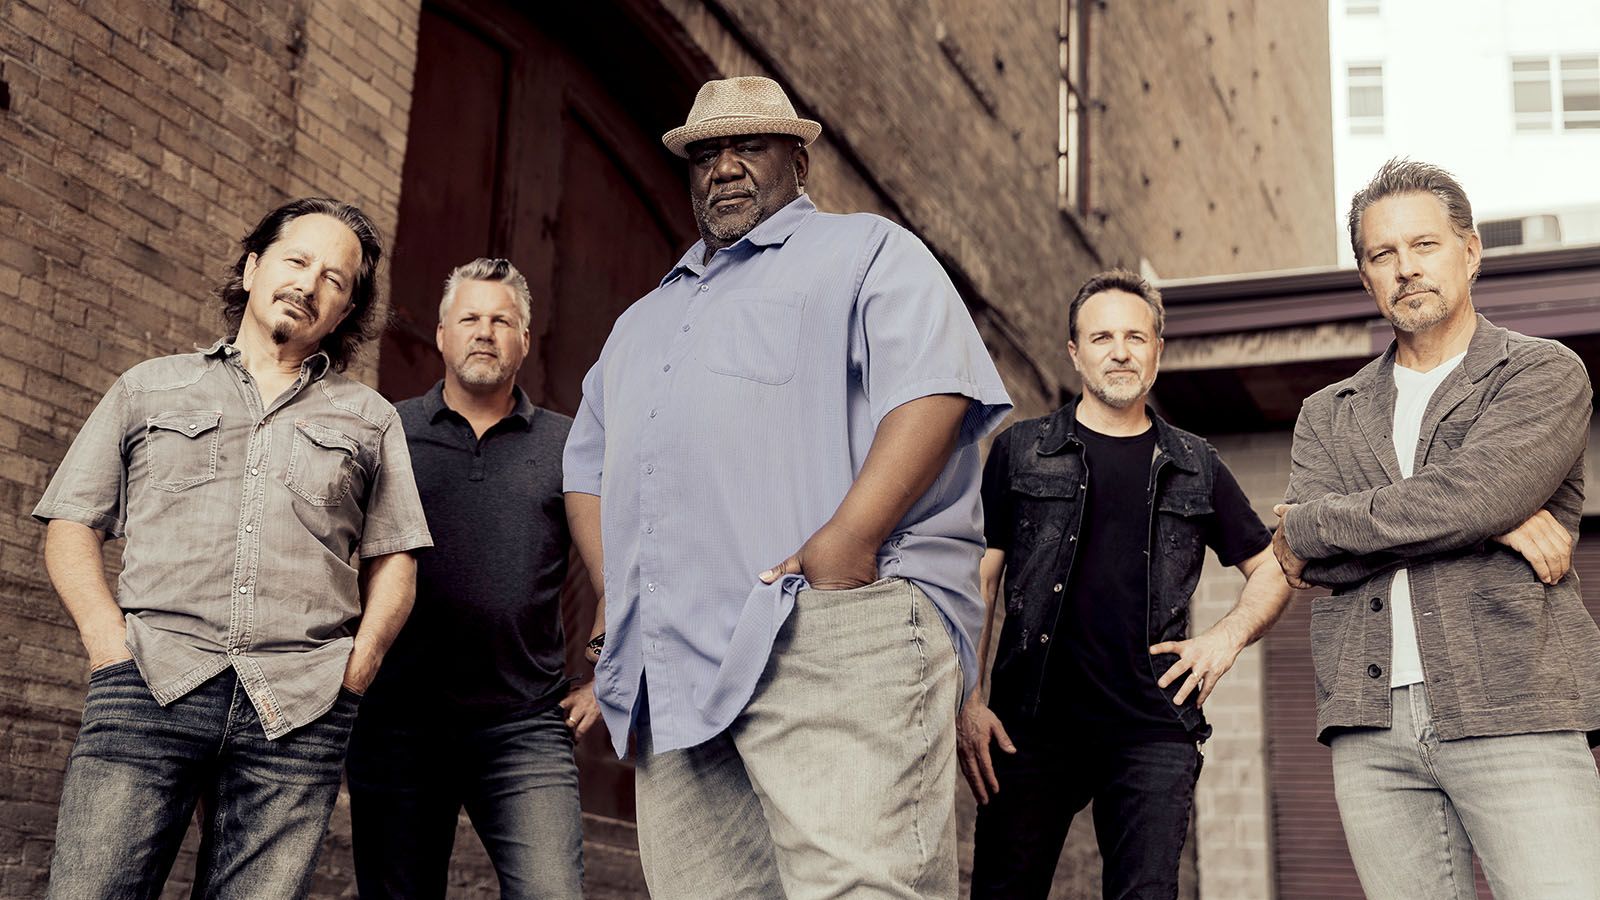 Altered Five Blues Band will headline the 10th annual Blues Bash on Saturday, Nov. 19.